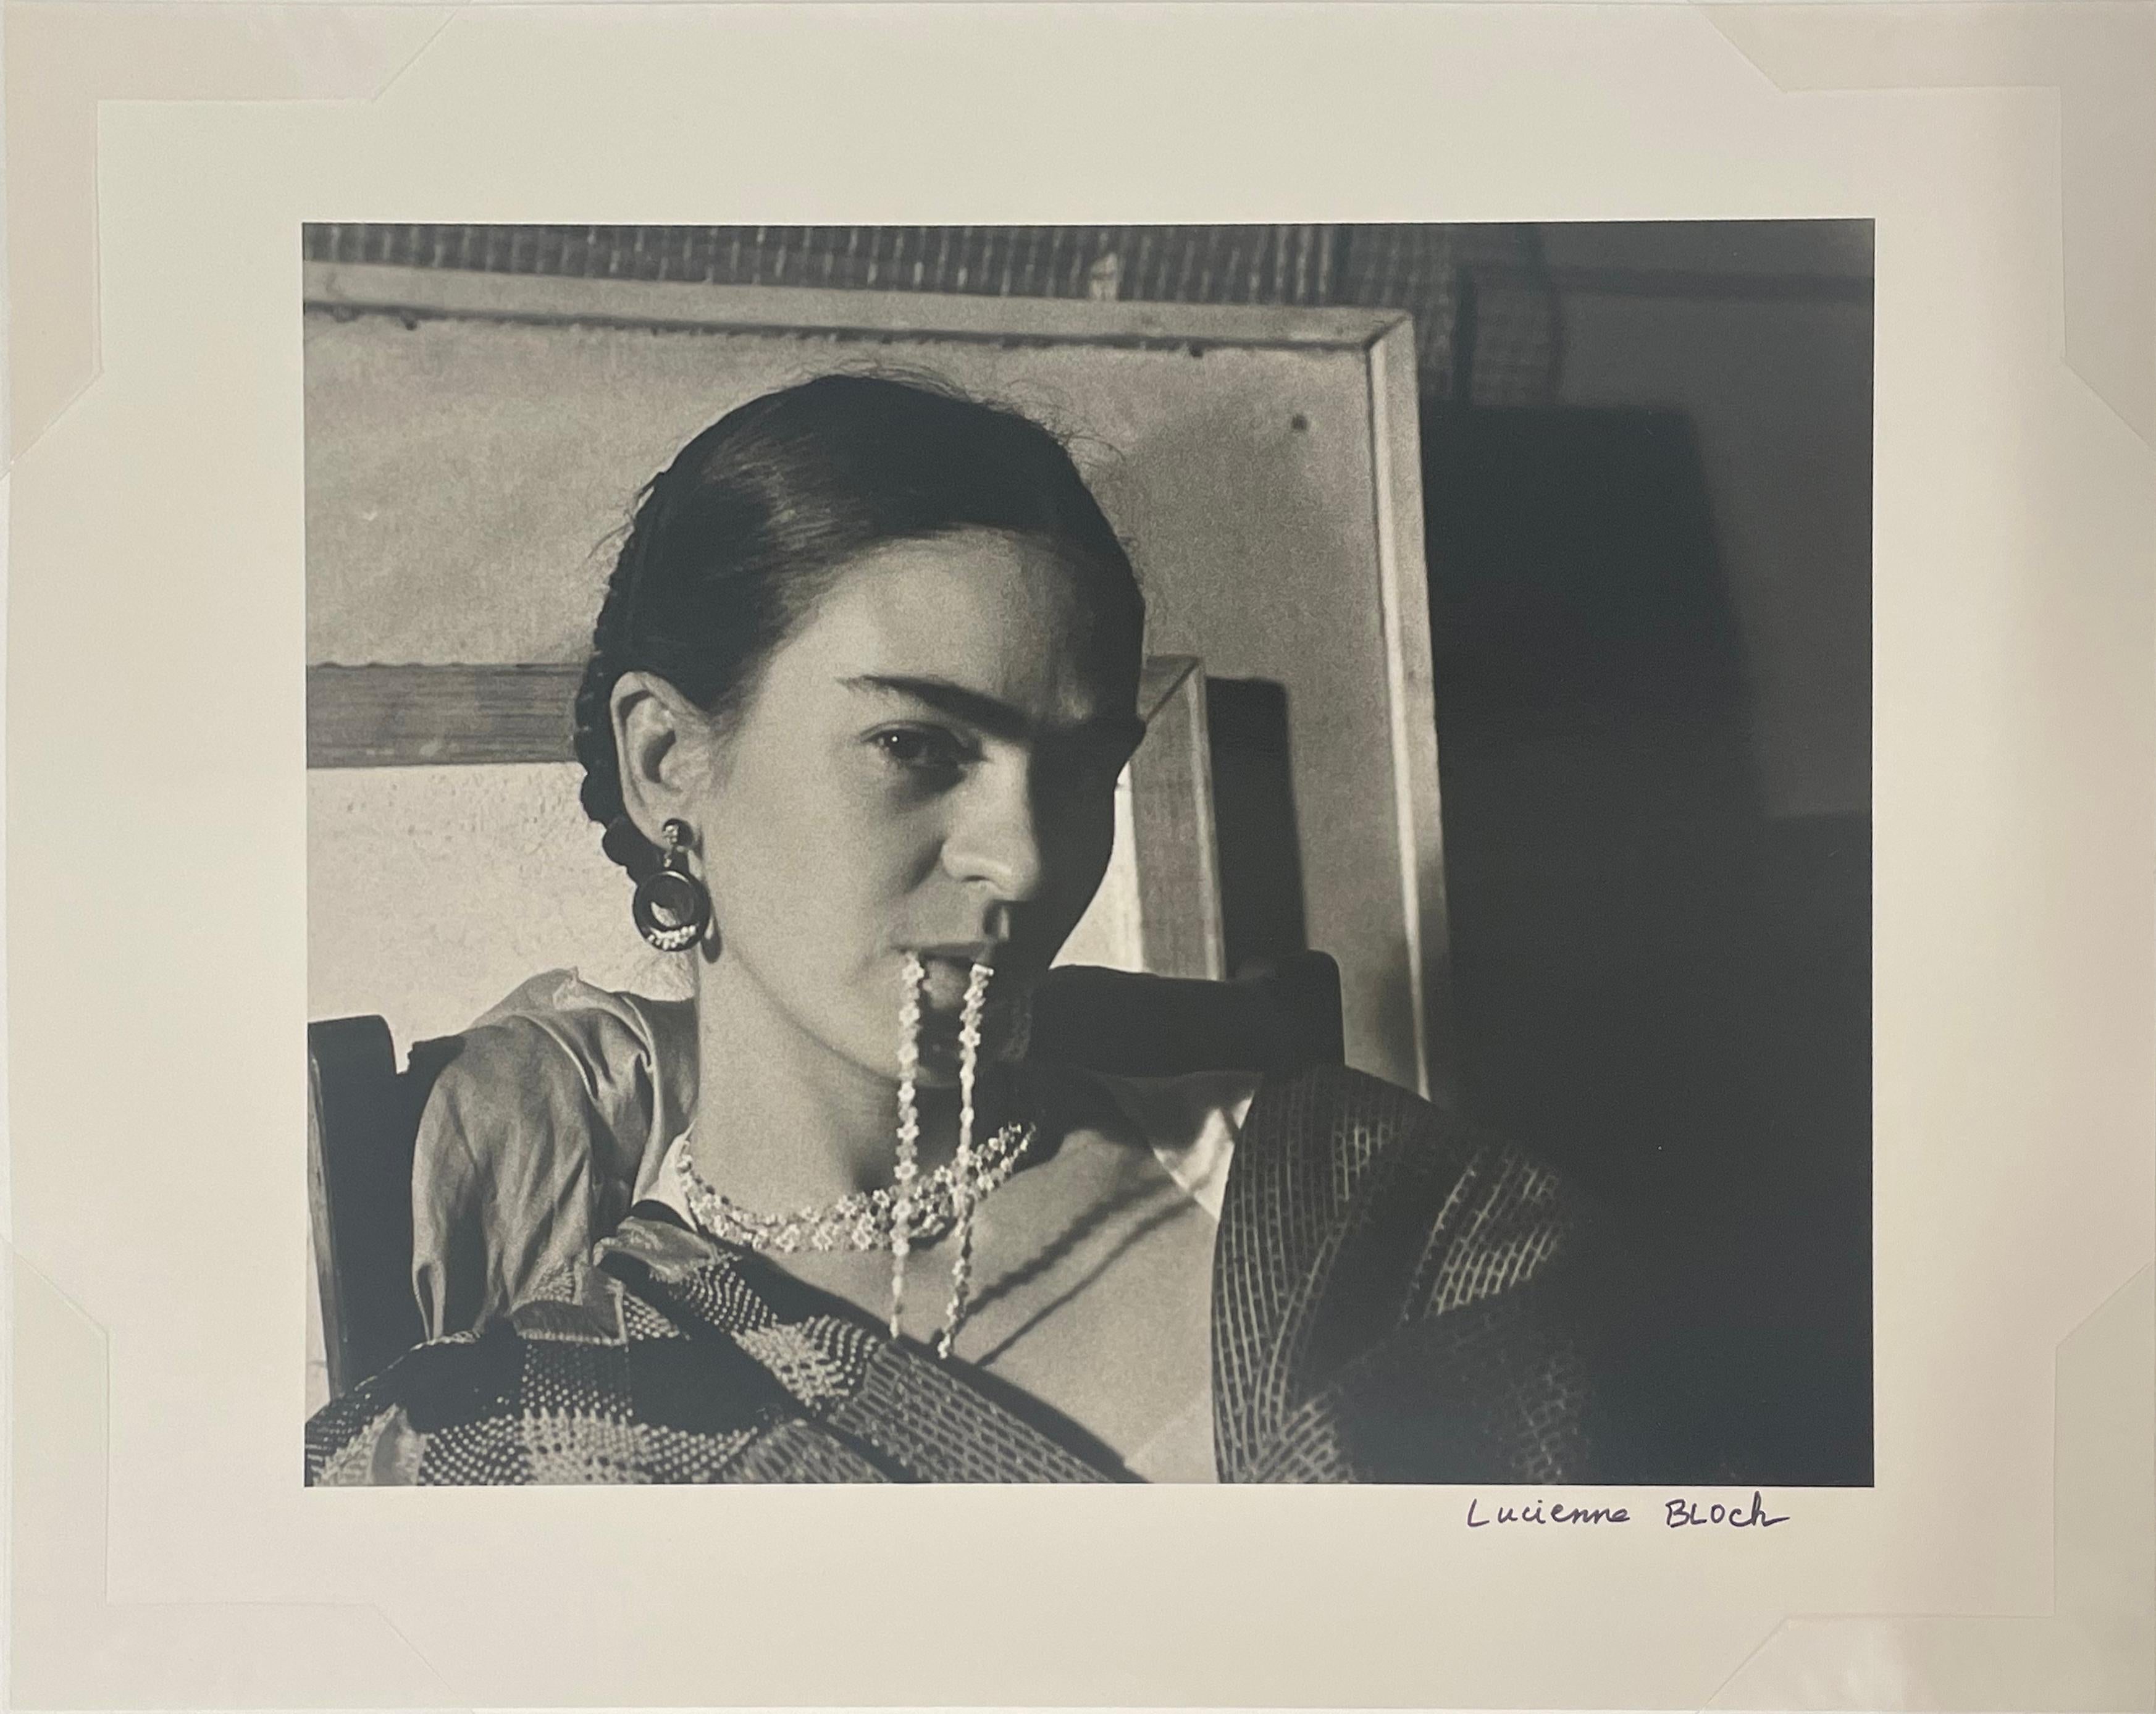 Frida Biting Her Necklace by Lucienne Bloch is a 8 1/4 x 10 1/4 inch silver gelatin print. This photograph is mounted on a 16 x 20 inch mount board with a window mat. It is signed on print recto by artist in pen and has a signature label on mount